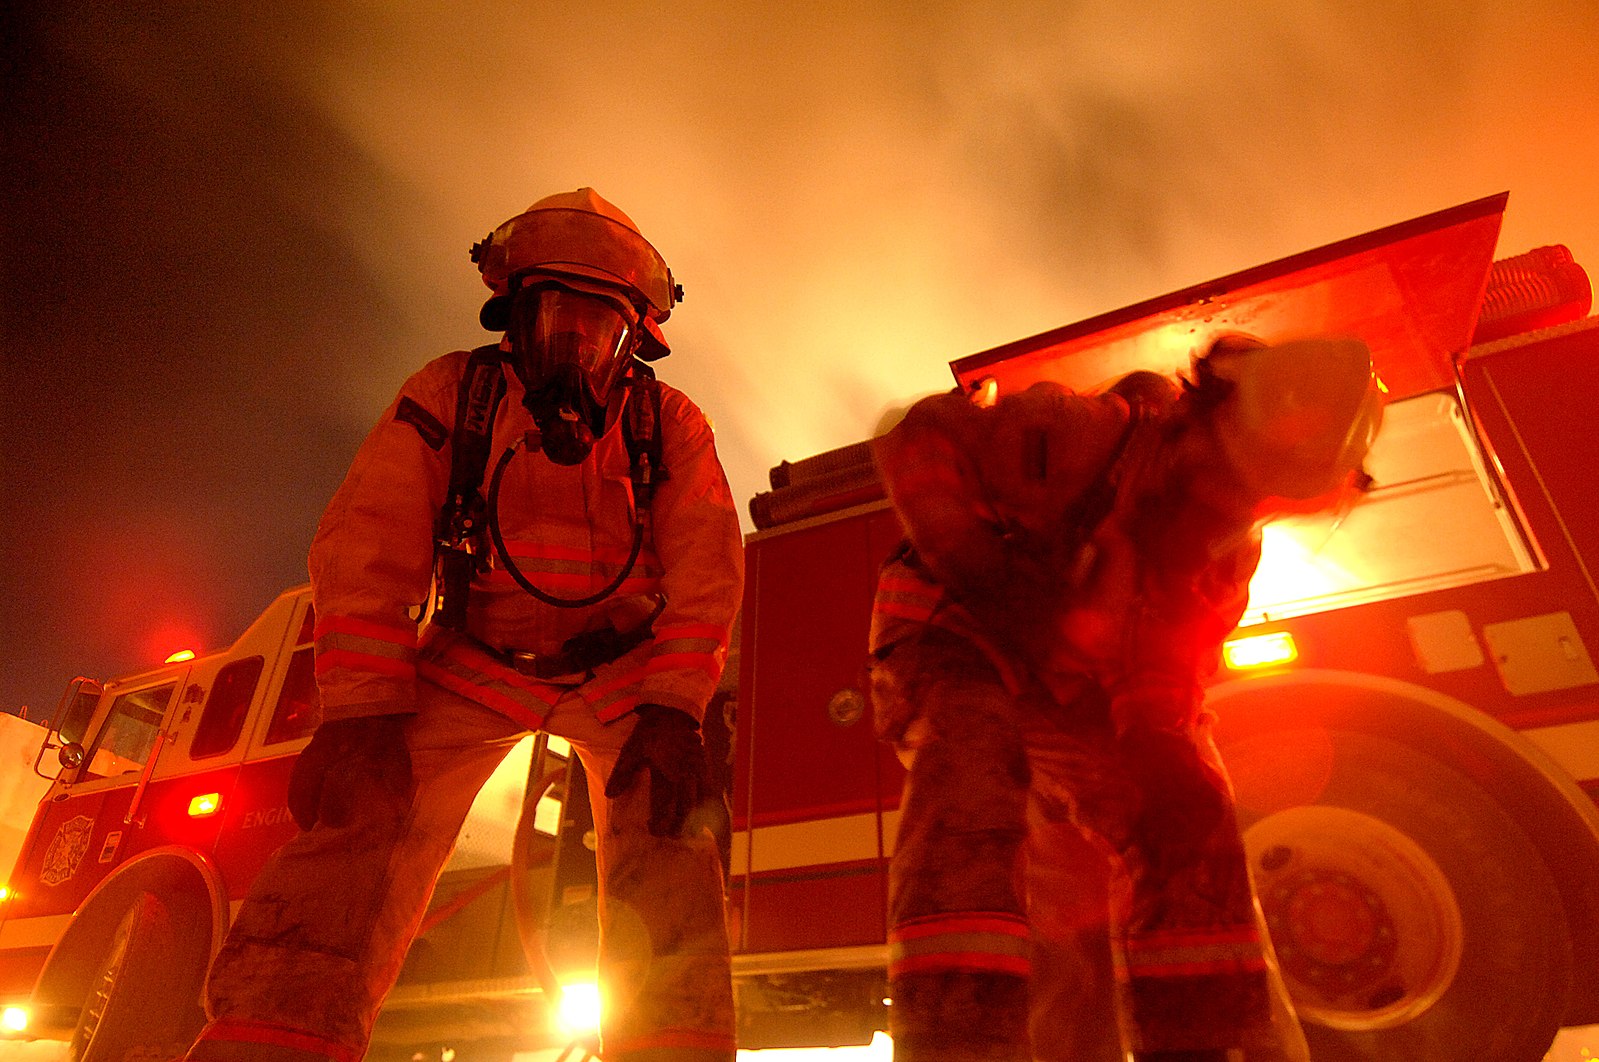 Contract firefighter jobs in iraq